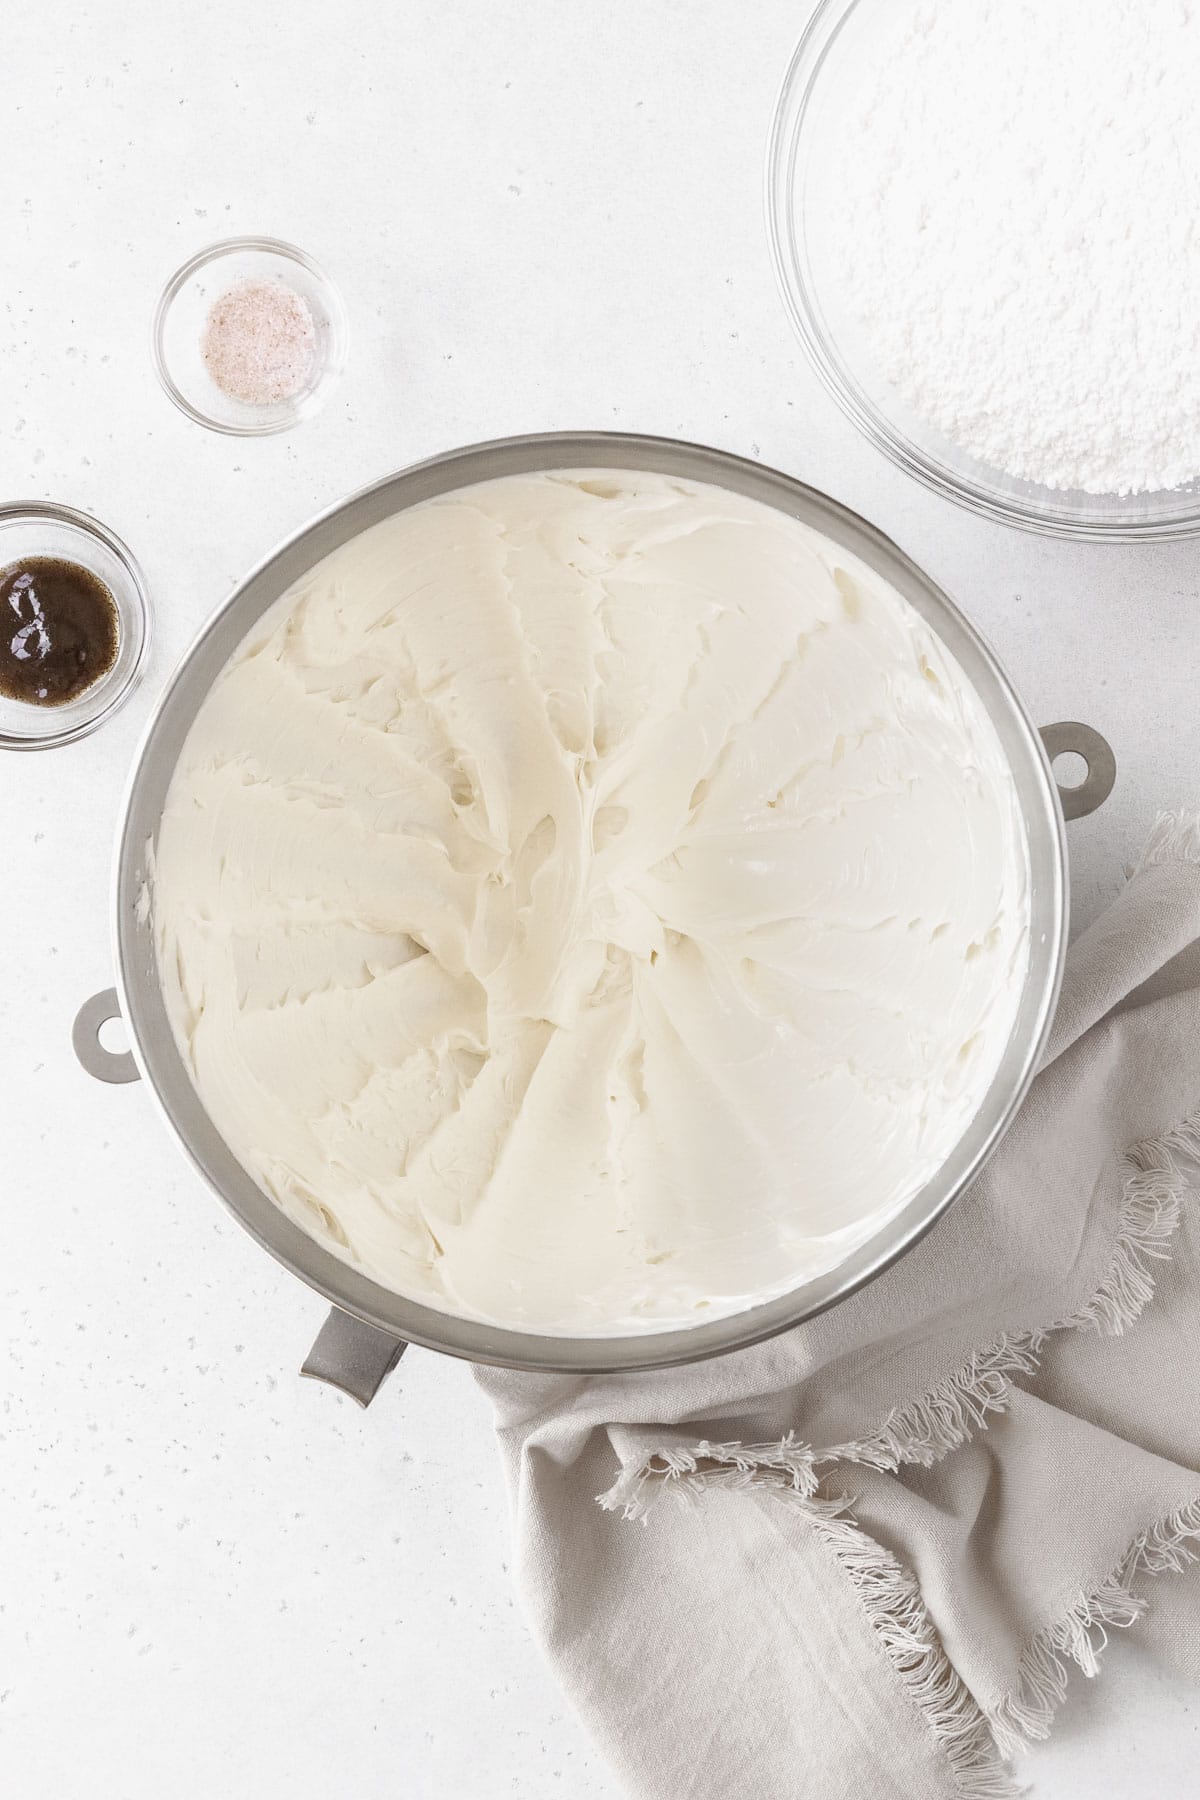 A large mixing bowl of whipped butter next to a bowl of confectioner's sugar and vanilla.